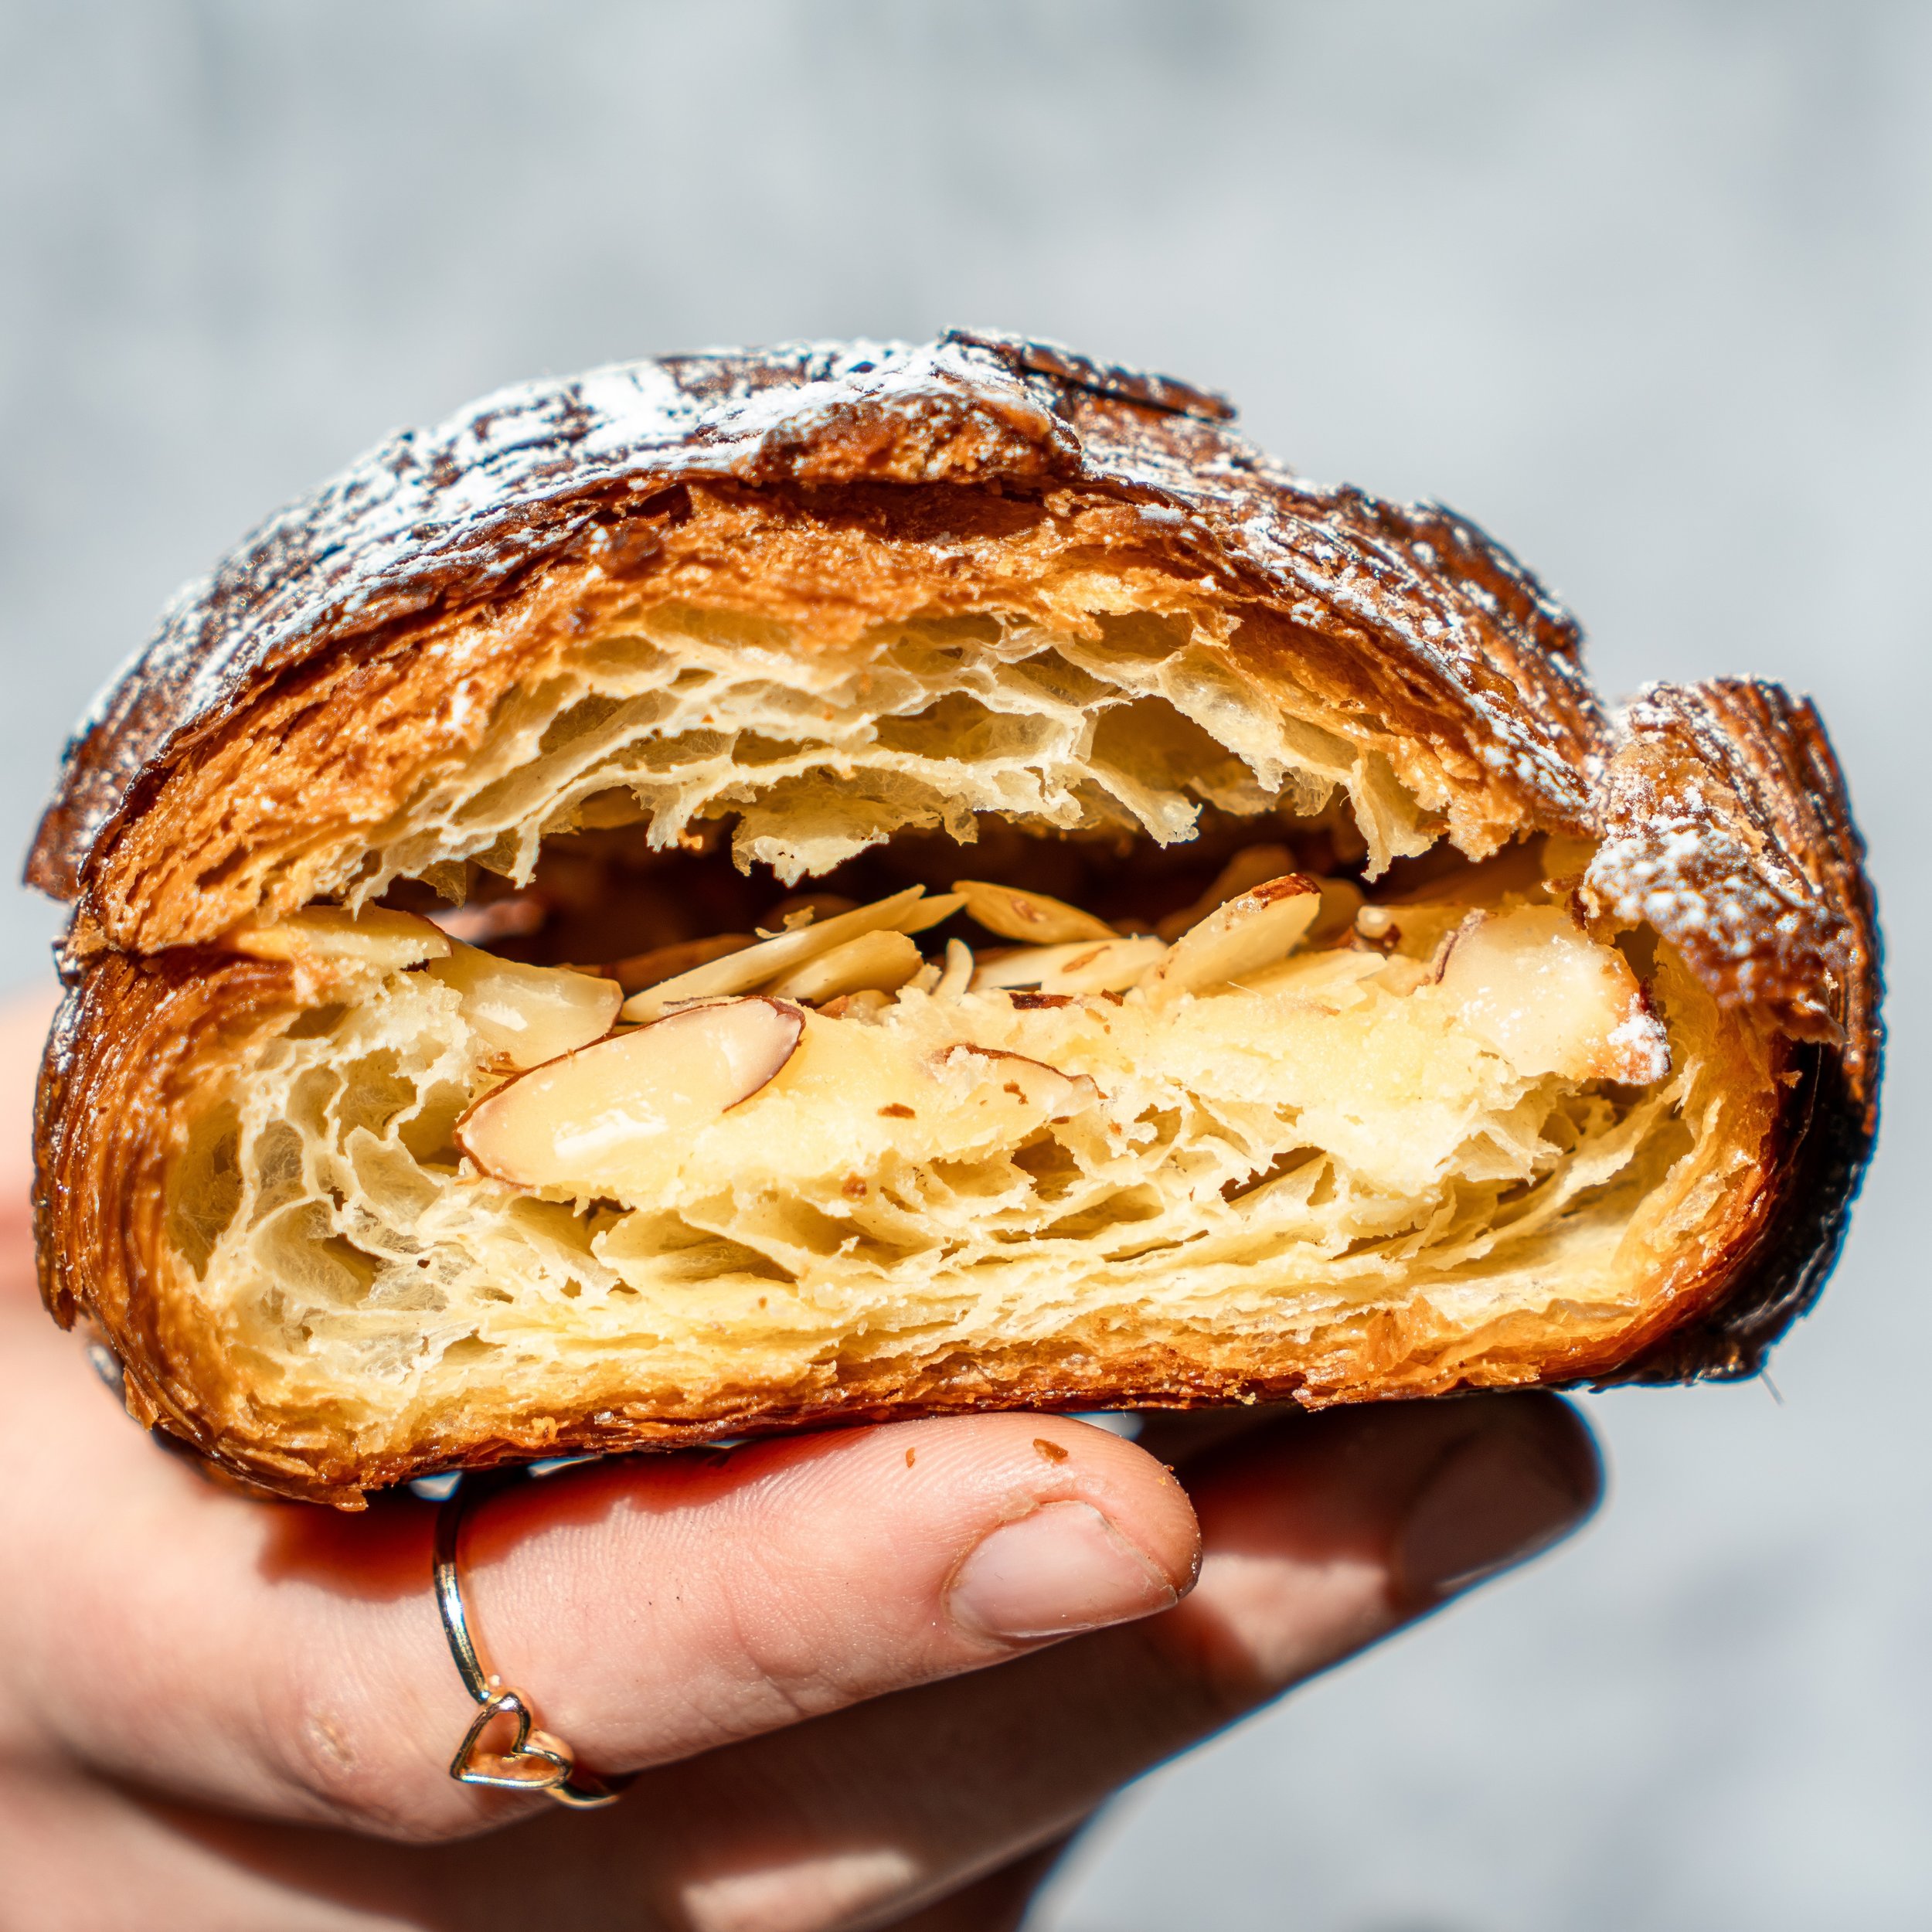 ALMOND CROISSANT 🥐

🌟 It&rsquo;s not just classic; it&rsquo;s iconic for a reason. 

🗣️ Bursting with luscious almond cream, adorned with silvered almonds, and crowned with even more almonds and a sumptuous dusting of powdered sugar&mdash;this cro